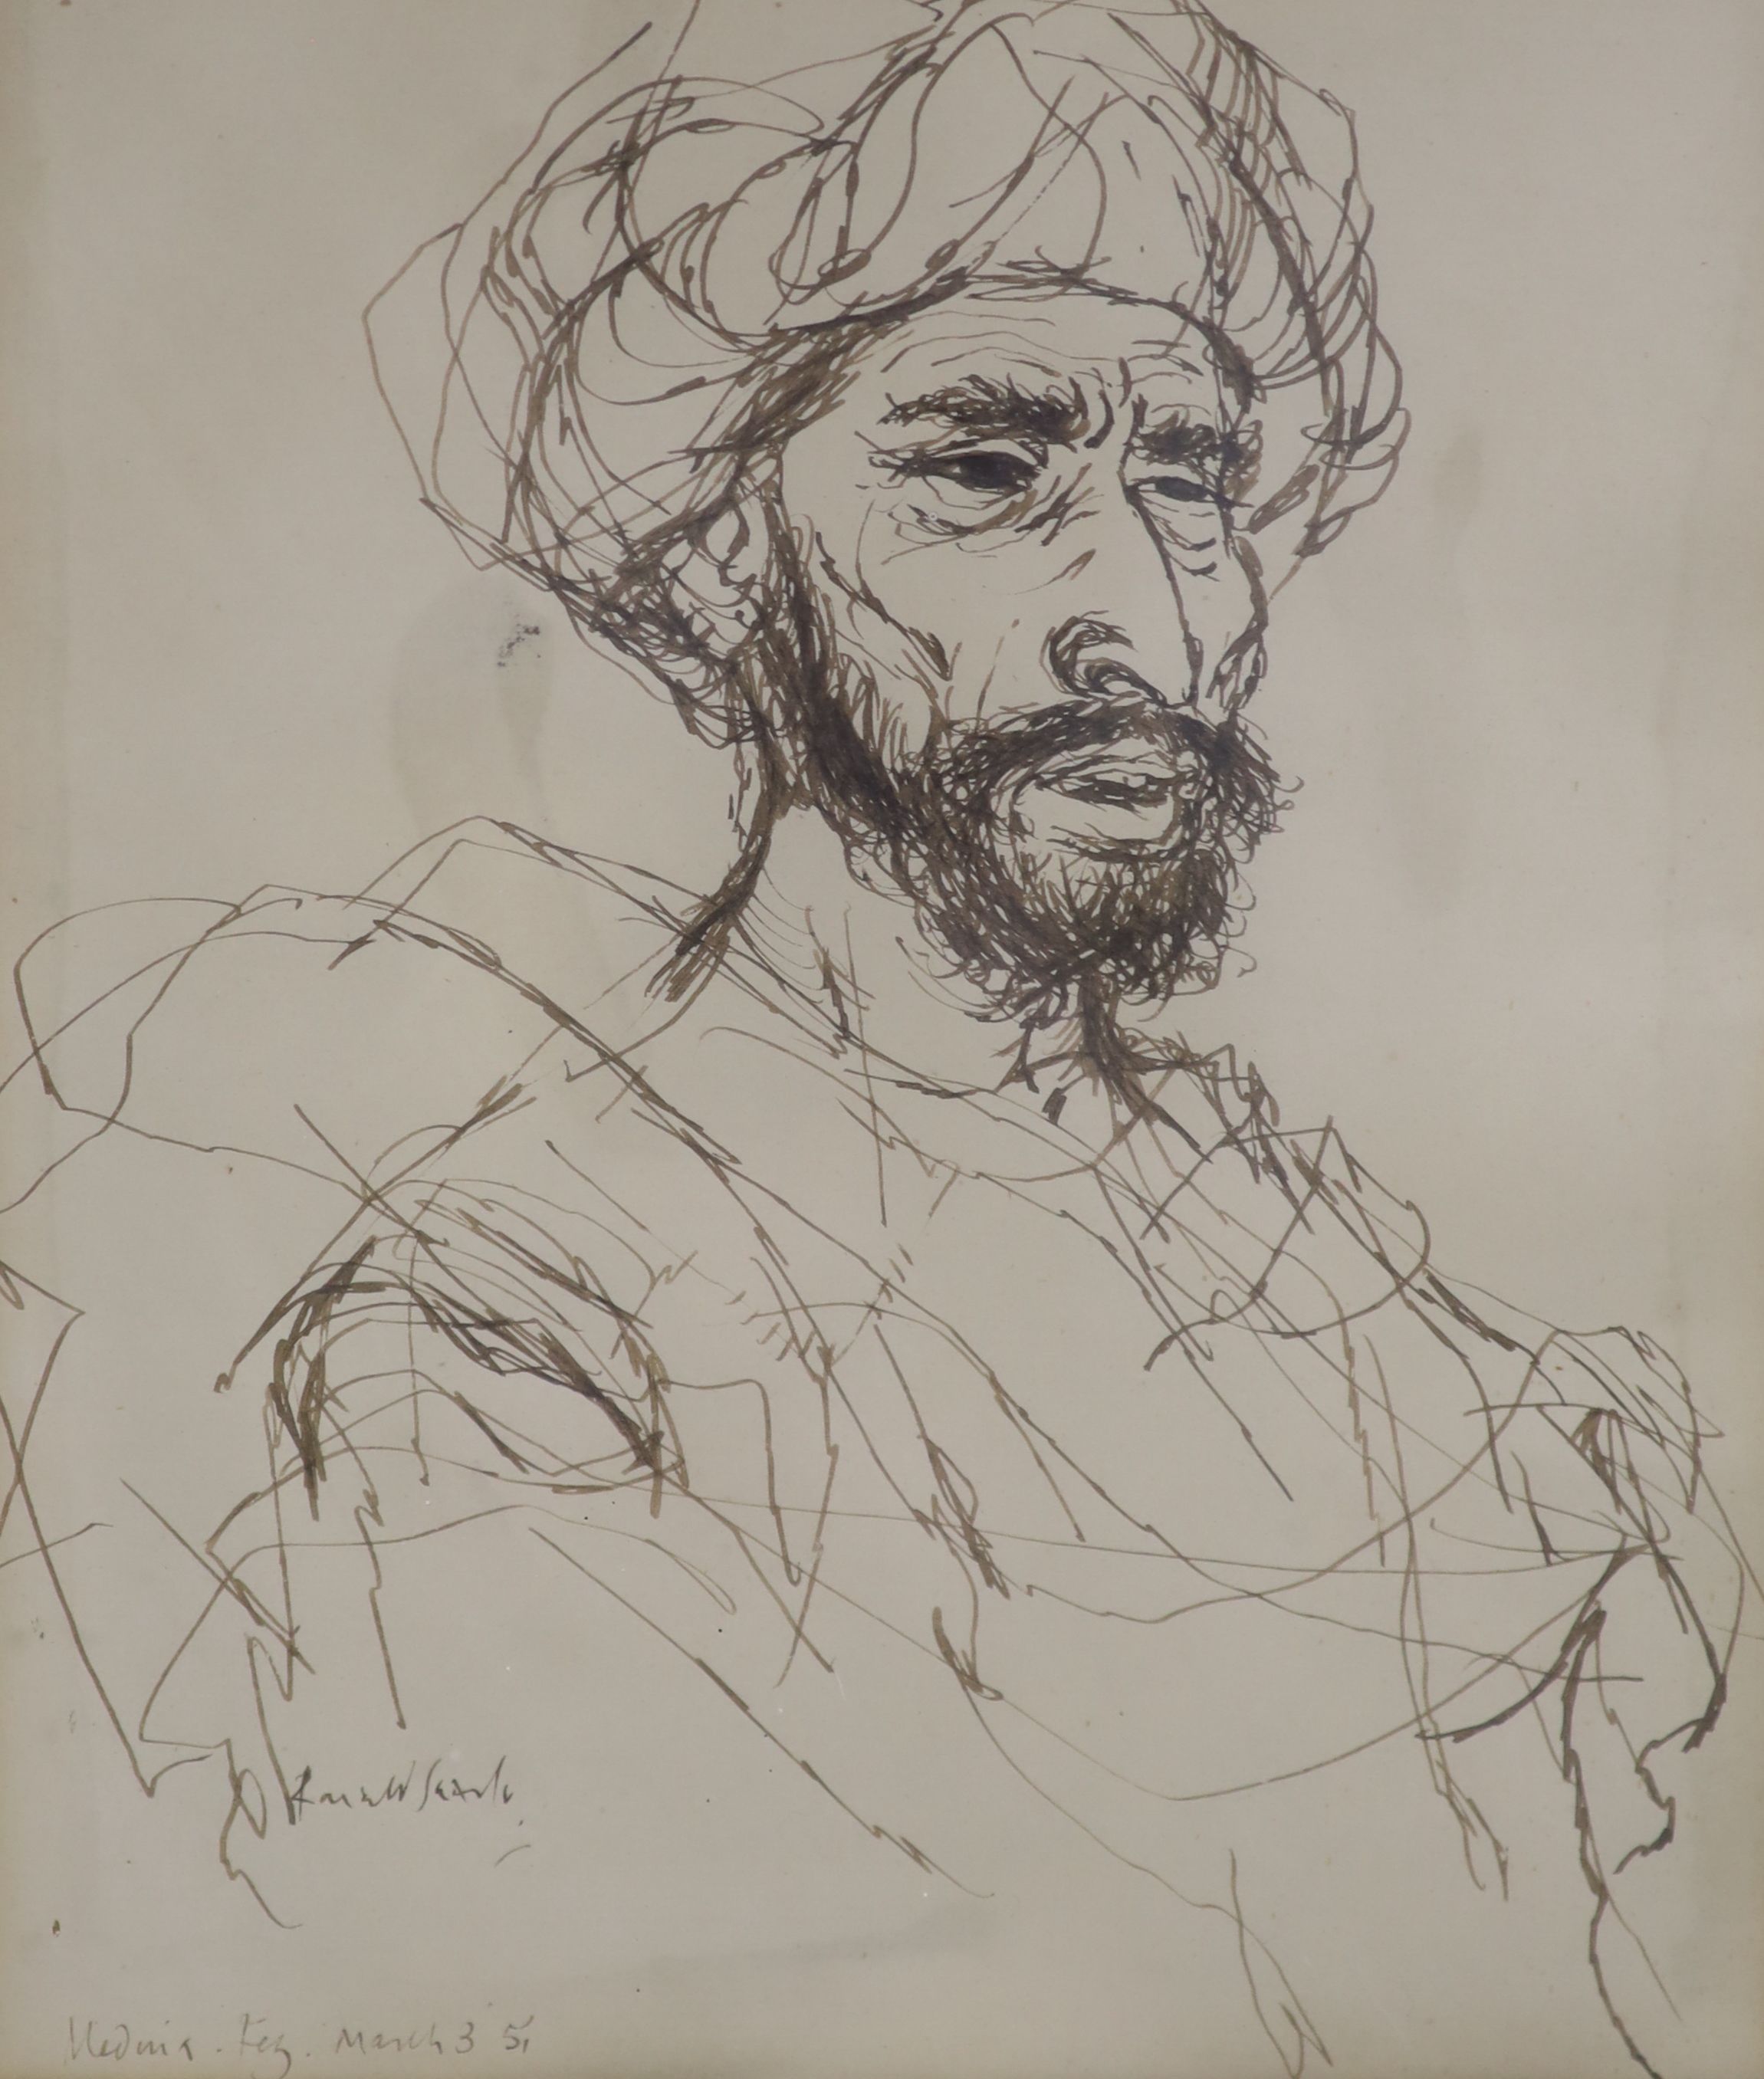 Ronald Searle (1920-2011), pen and ink, 'Medina. Fez. March 3 51', signed, 22 x 18cm